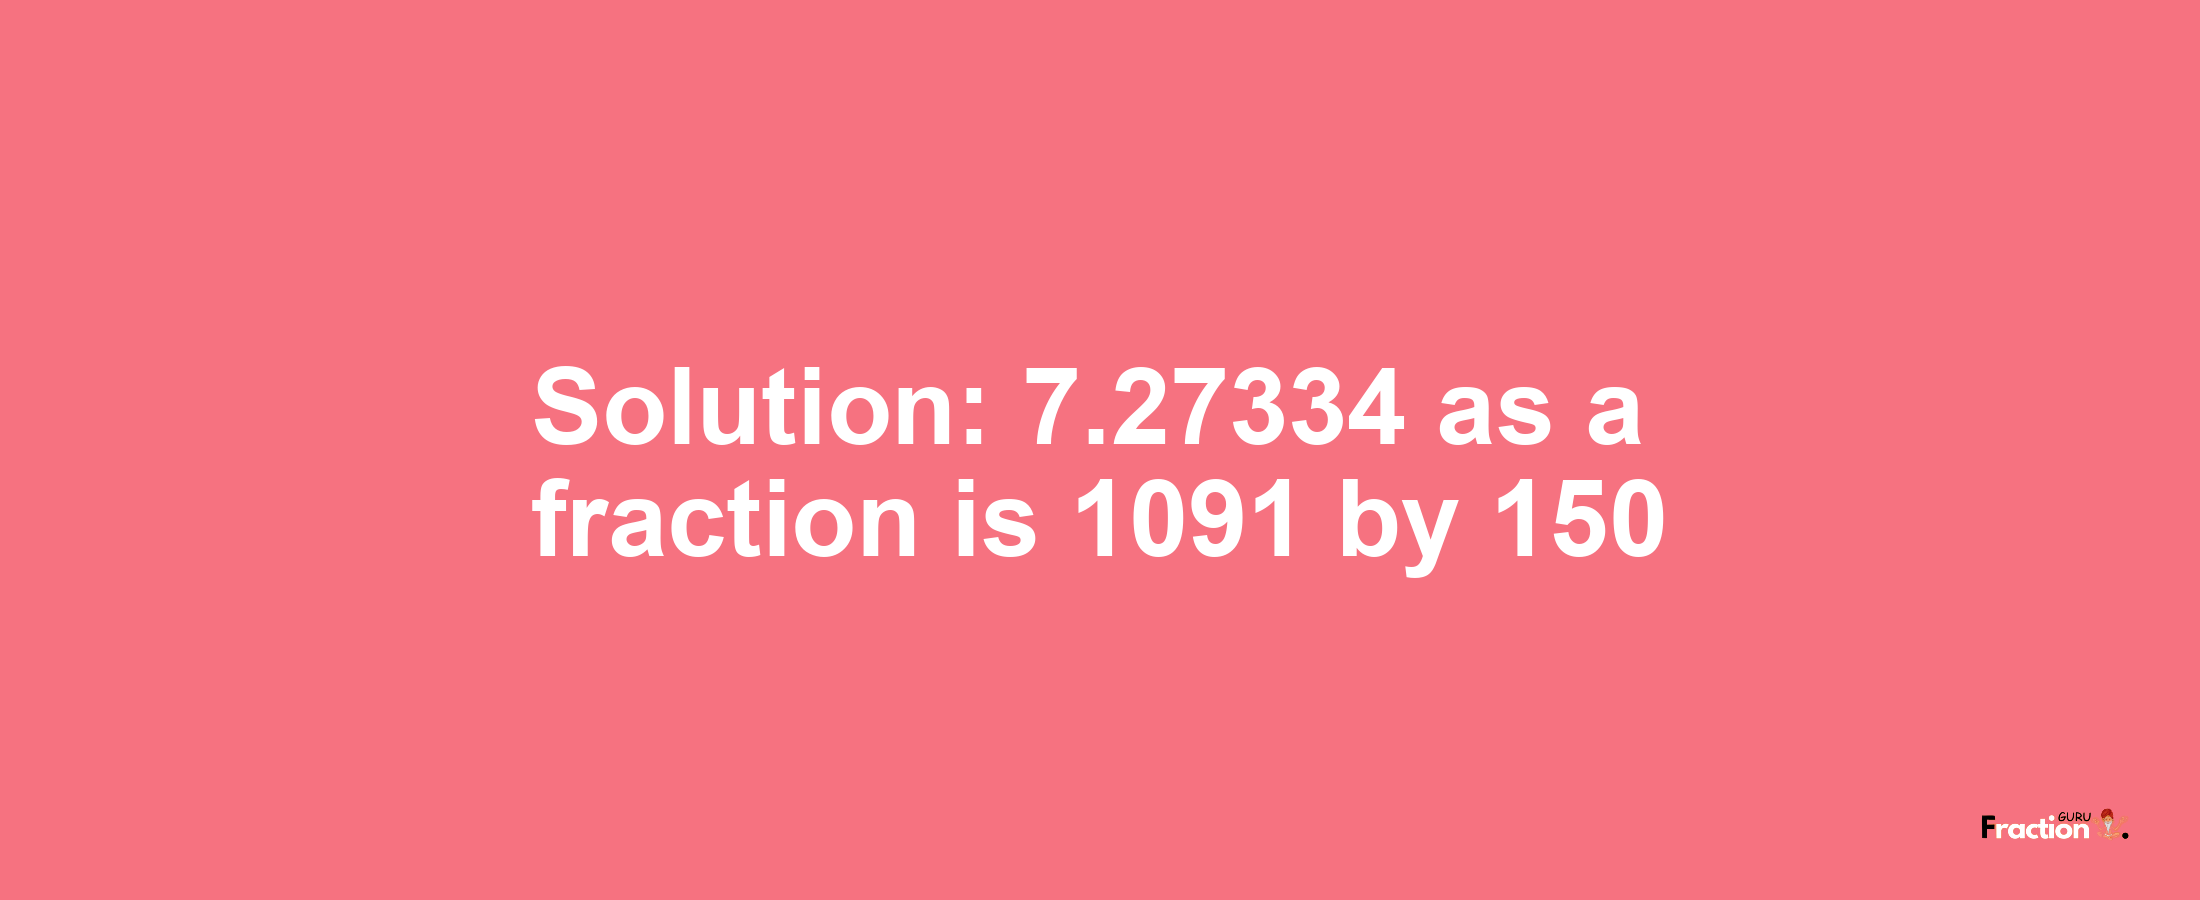 Solution:7.27334 as a fraction is 1091/150